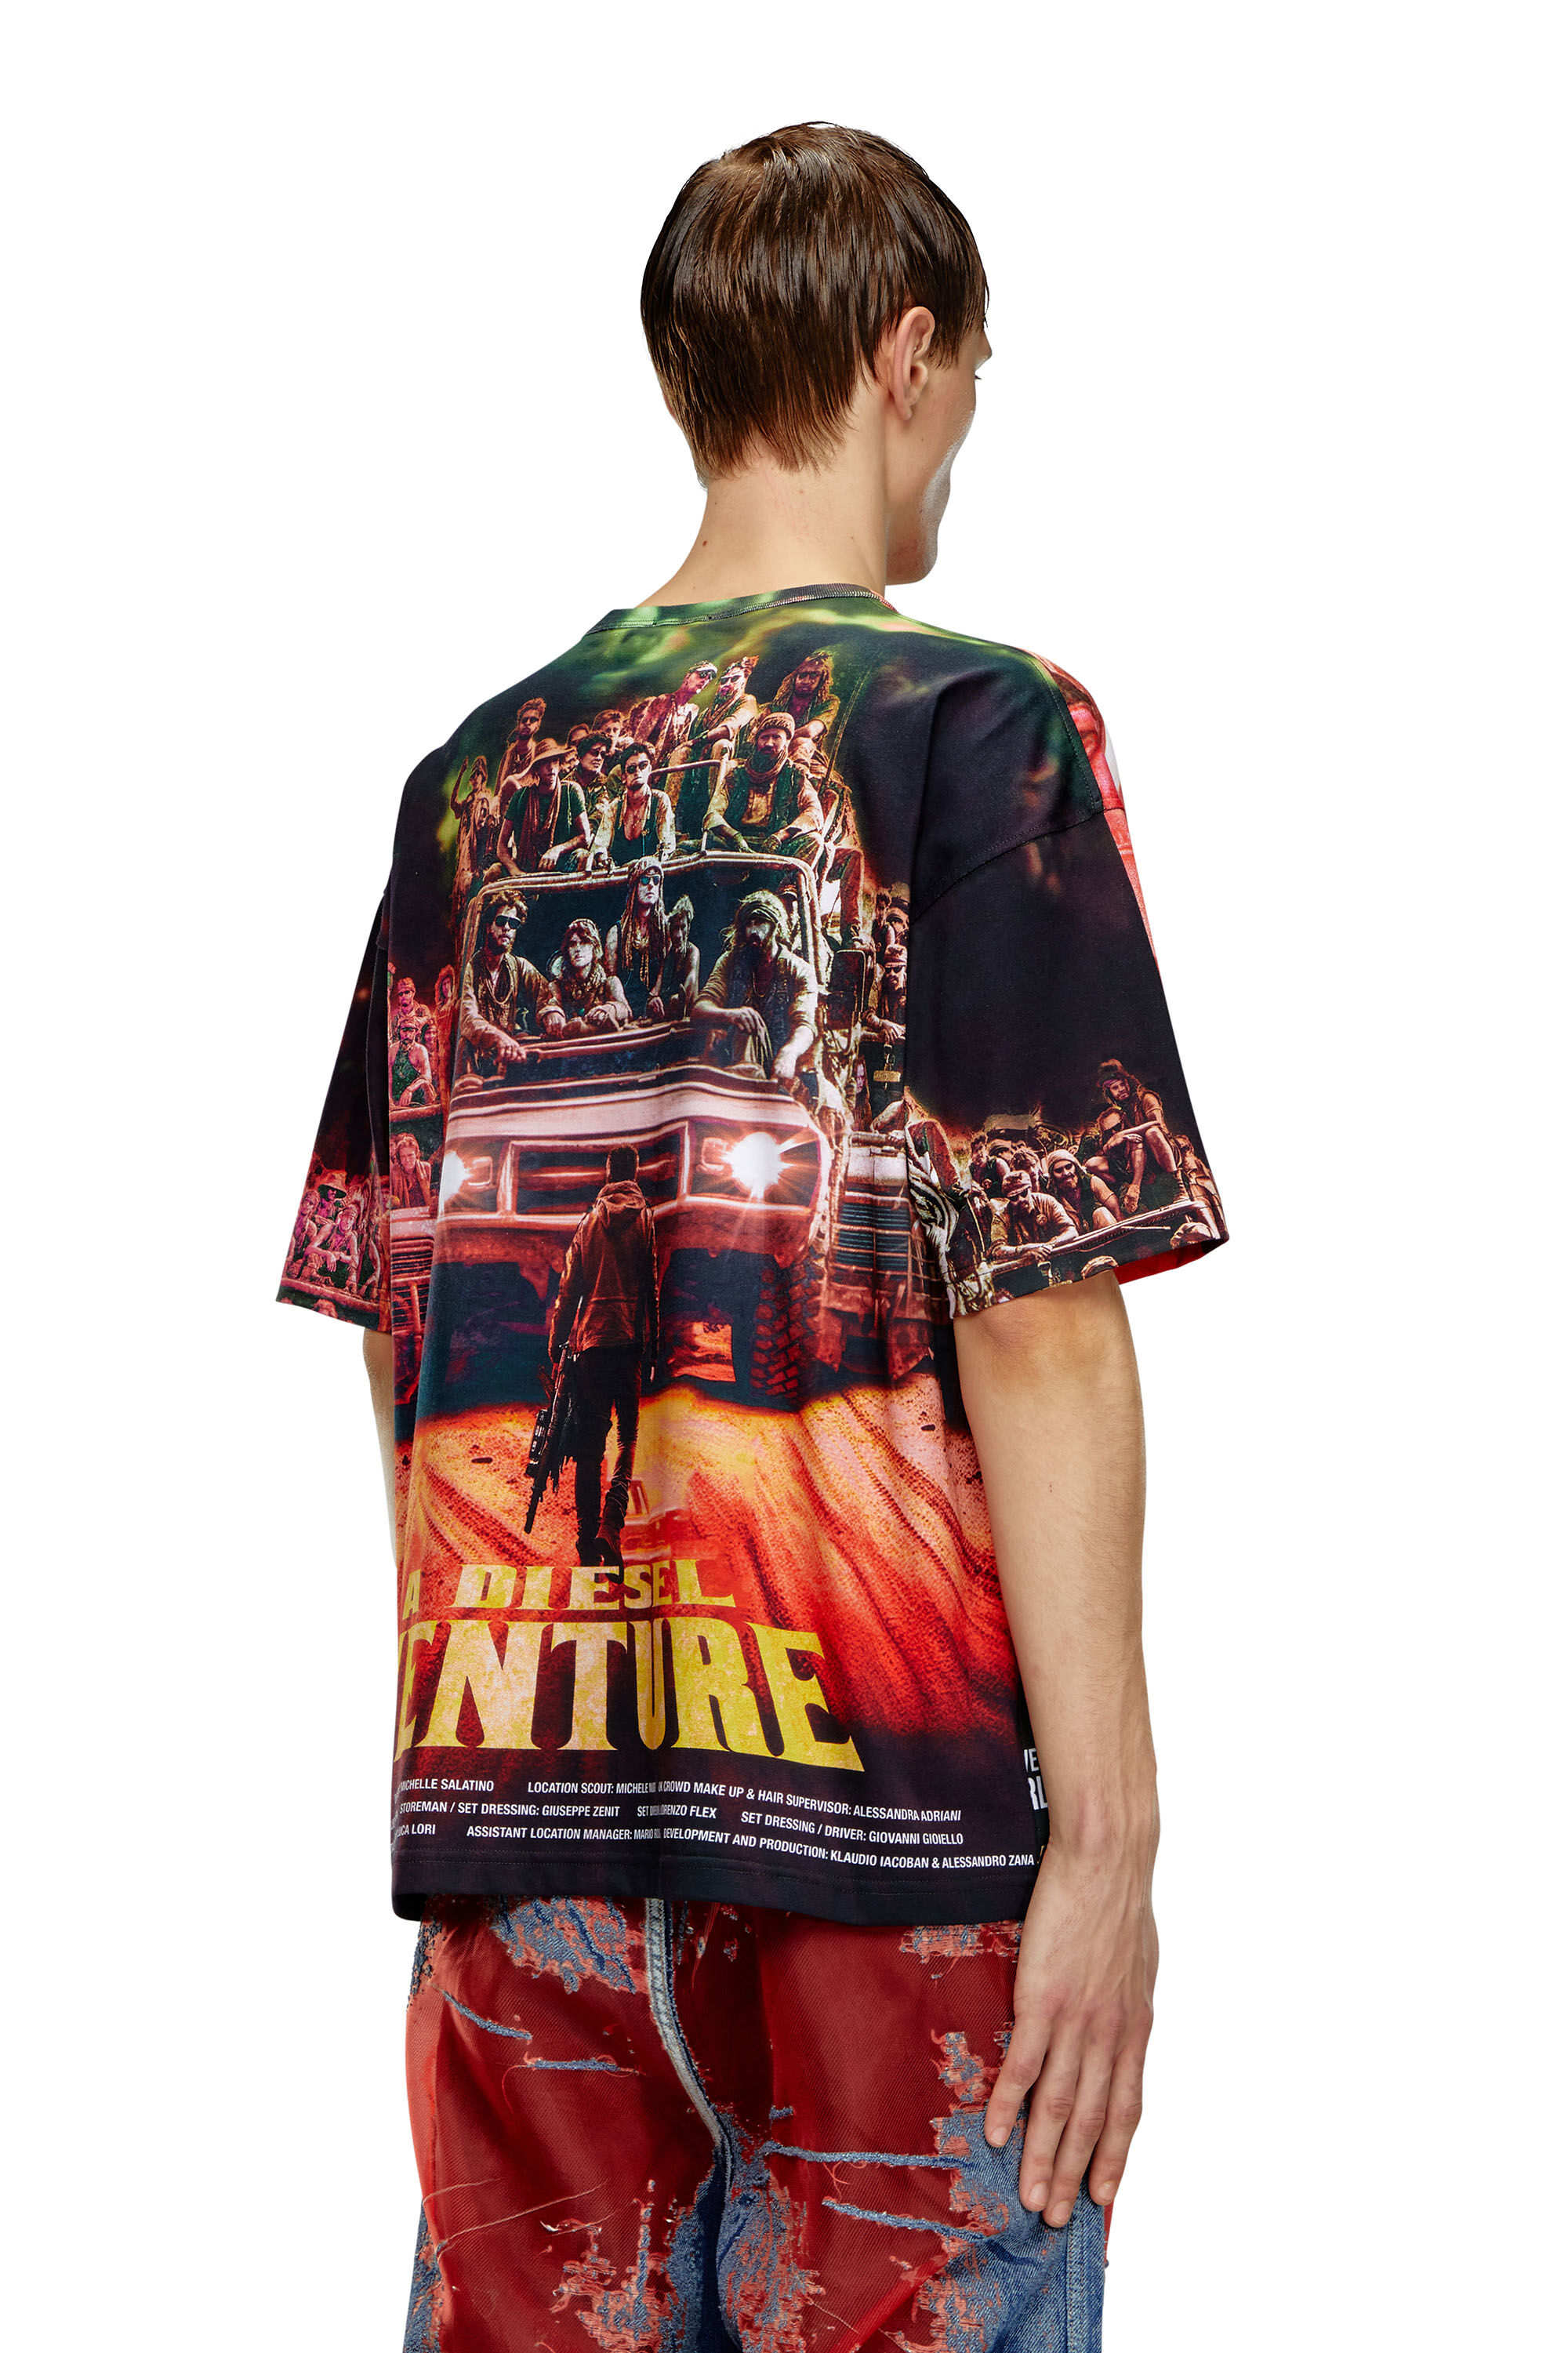 Diesel - T-BOXT-ADVENTURE, Male T-shirt with Diesel film print in マルチカラー - Image 4